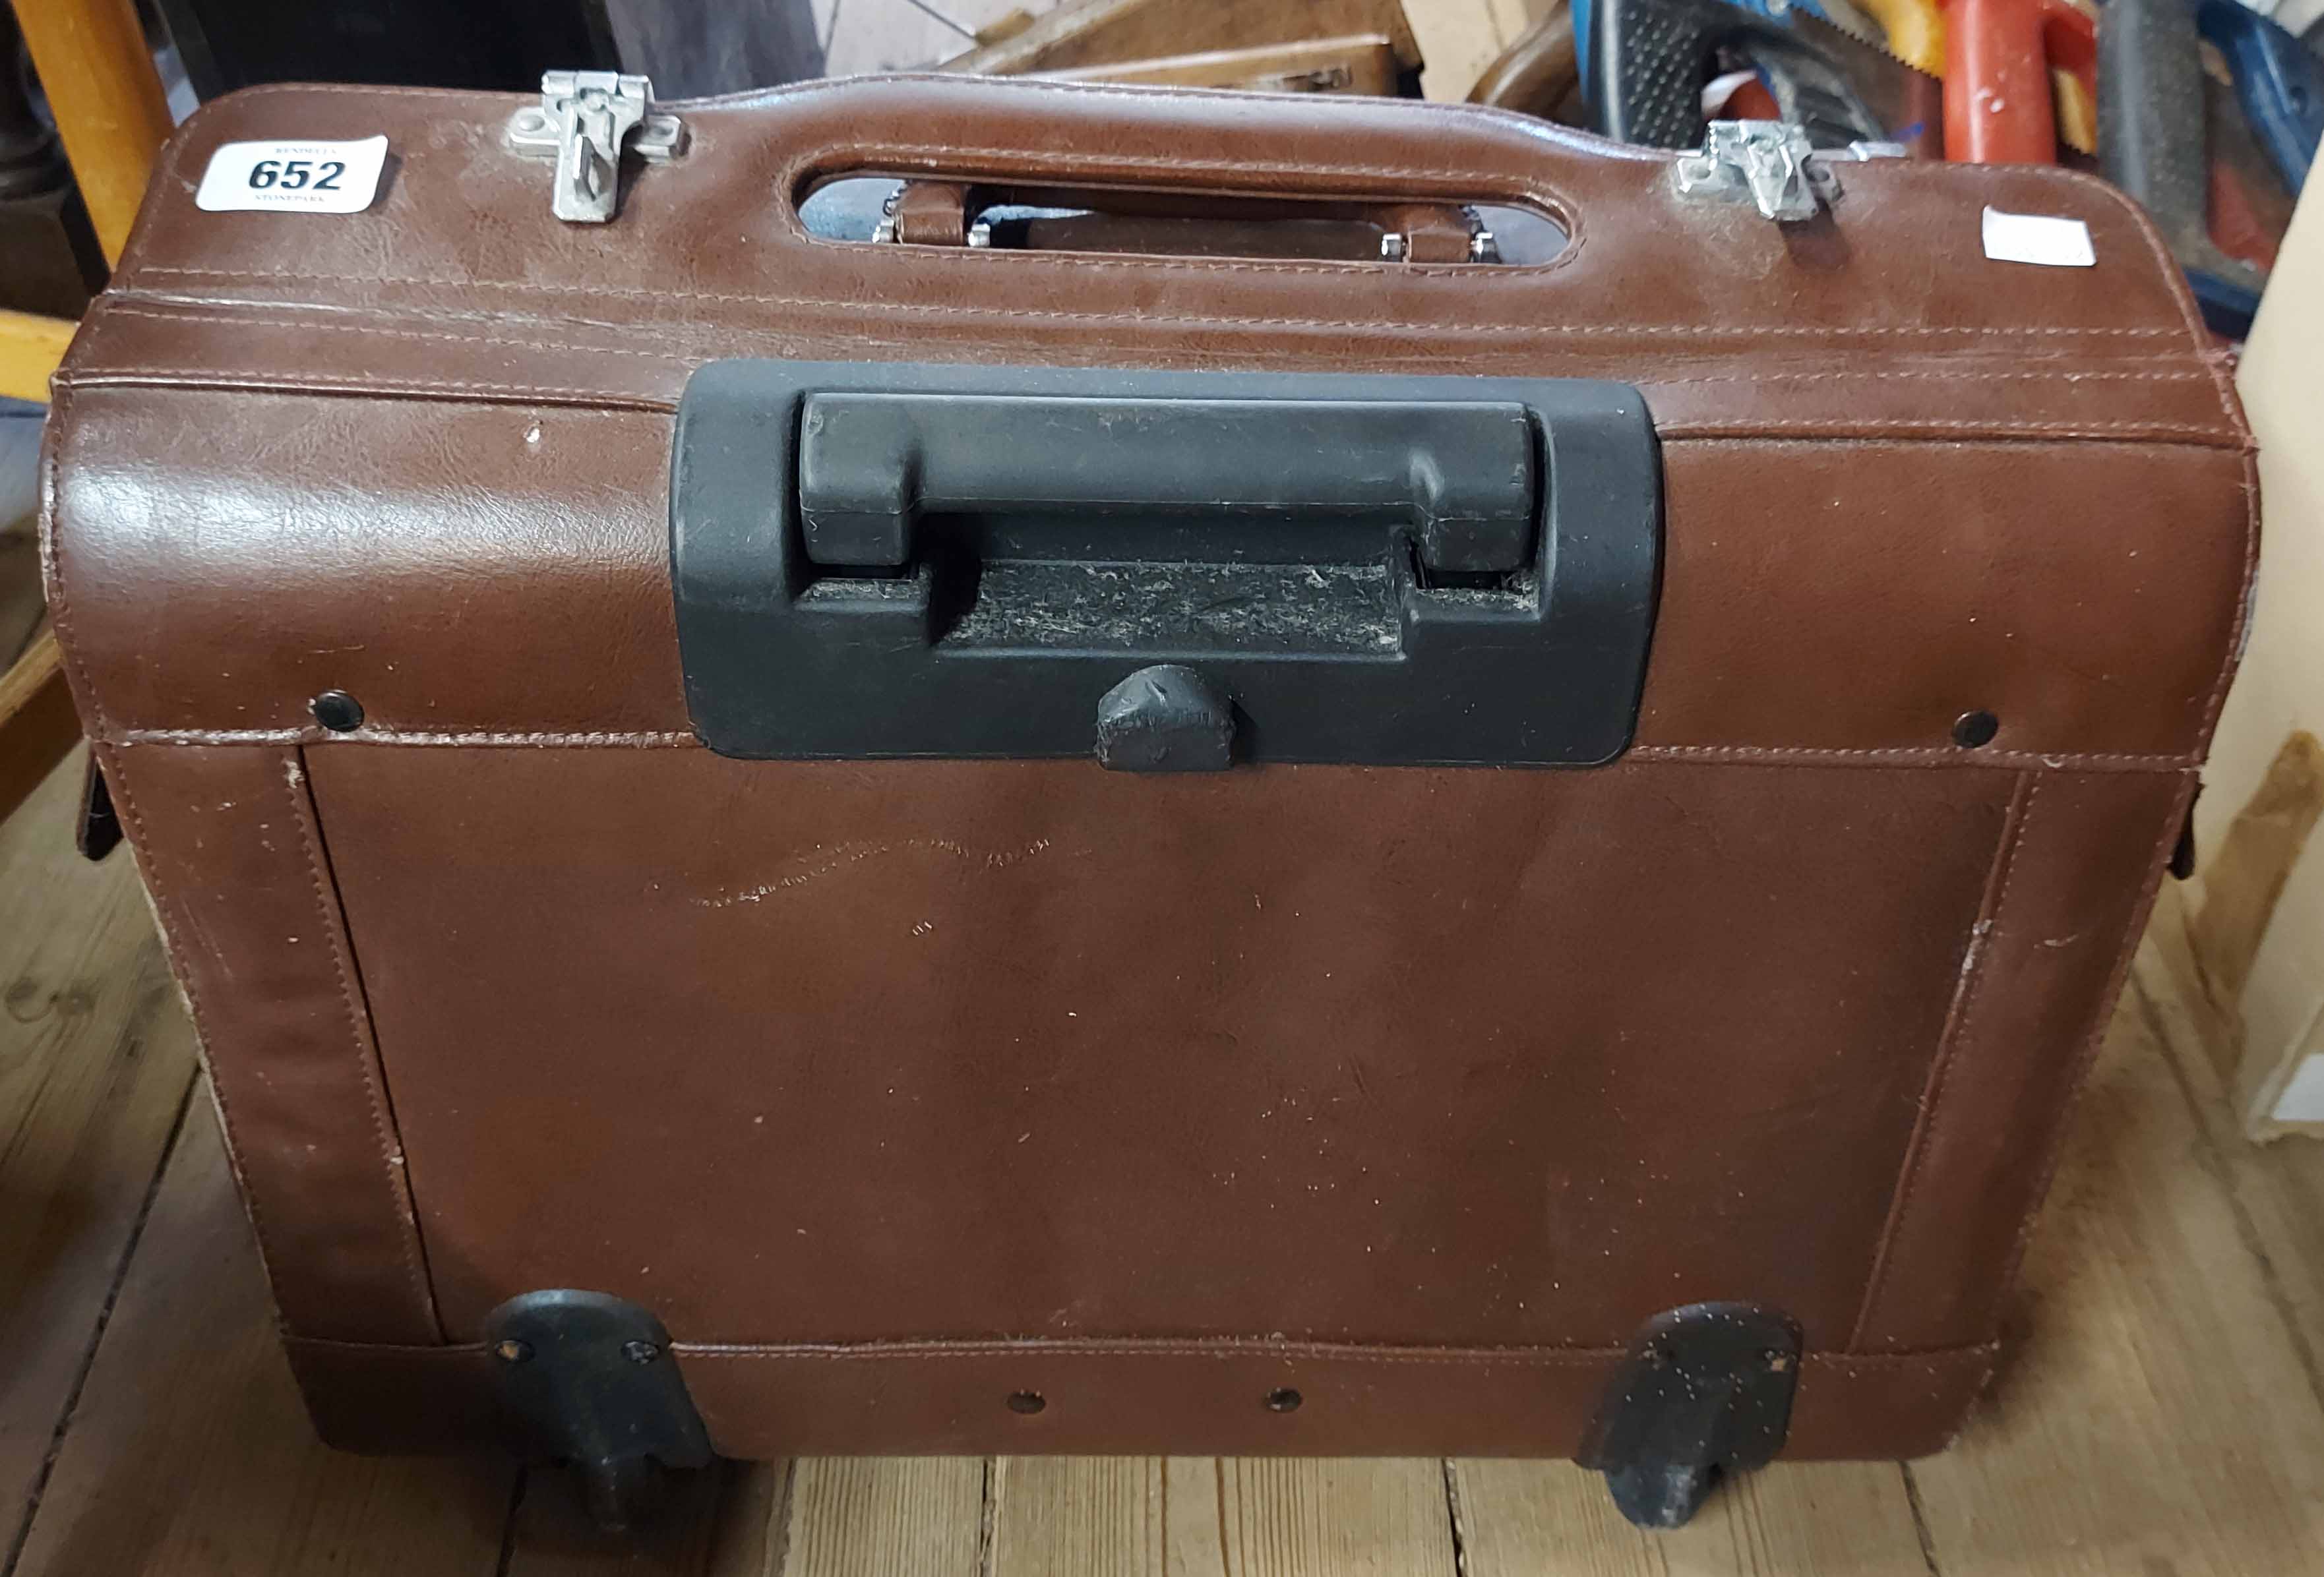 A leather briefcase on wheels